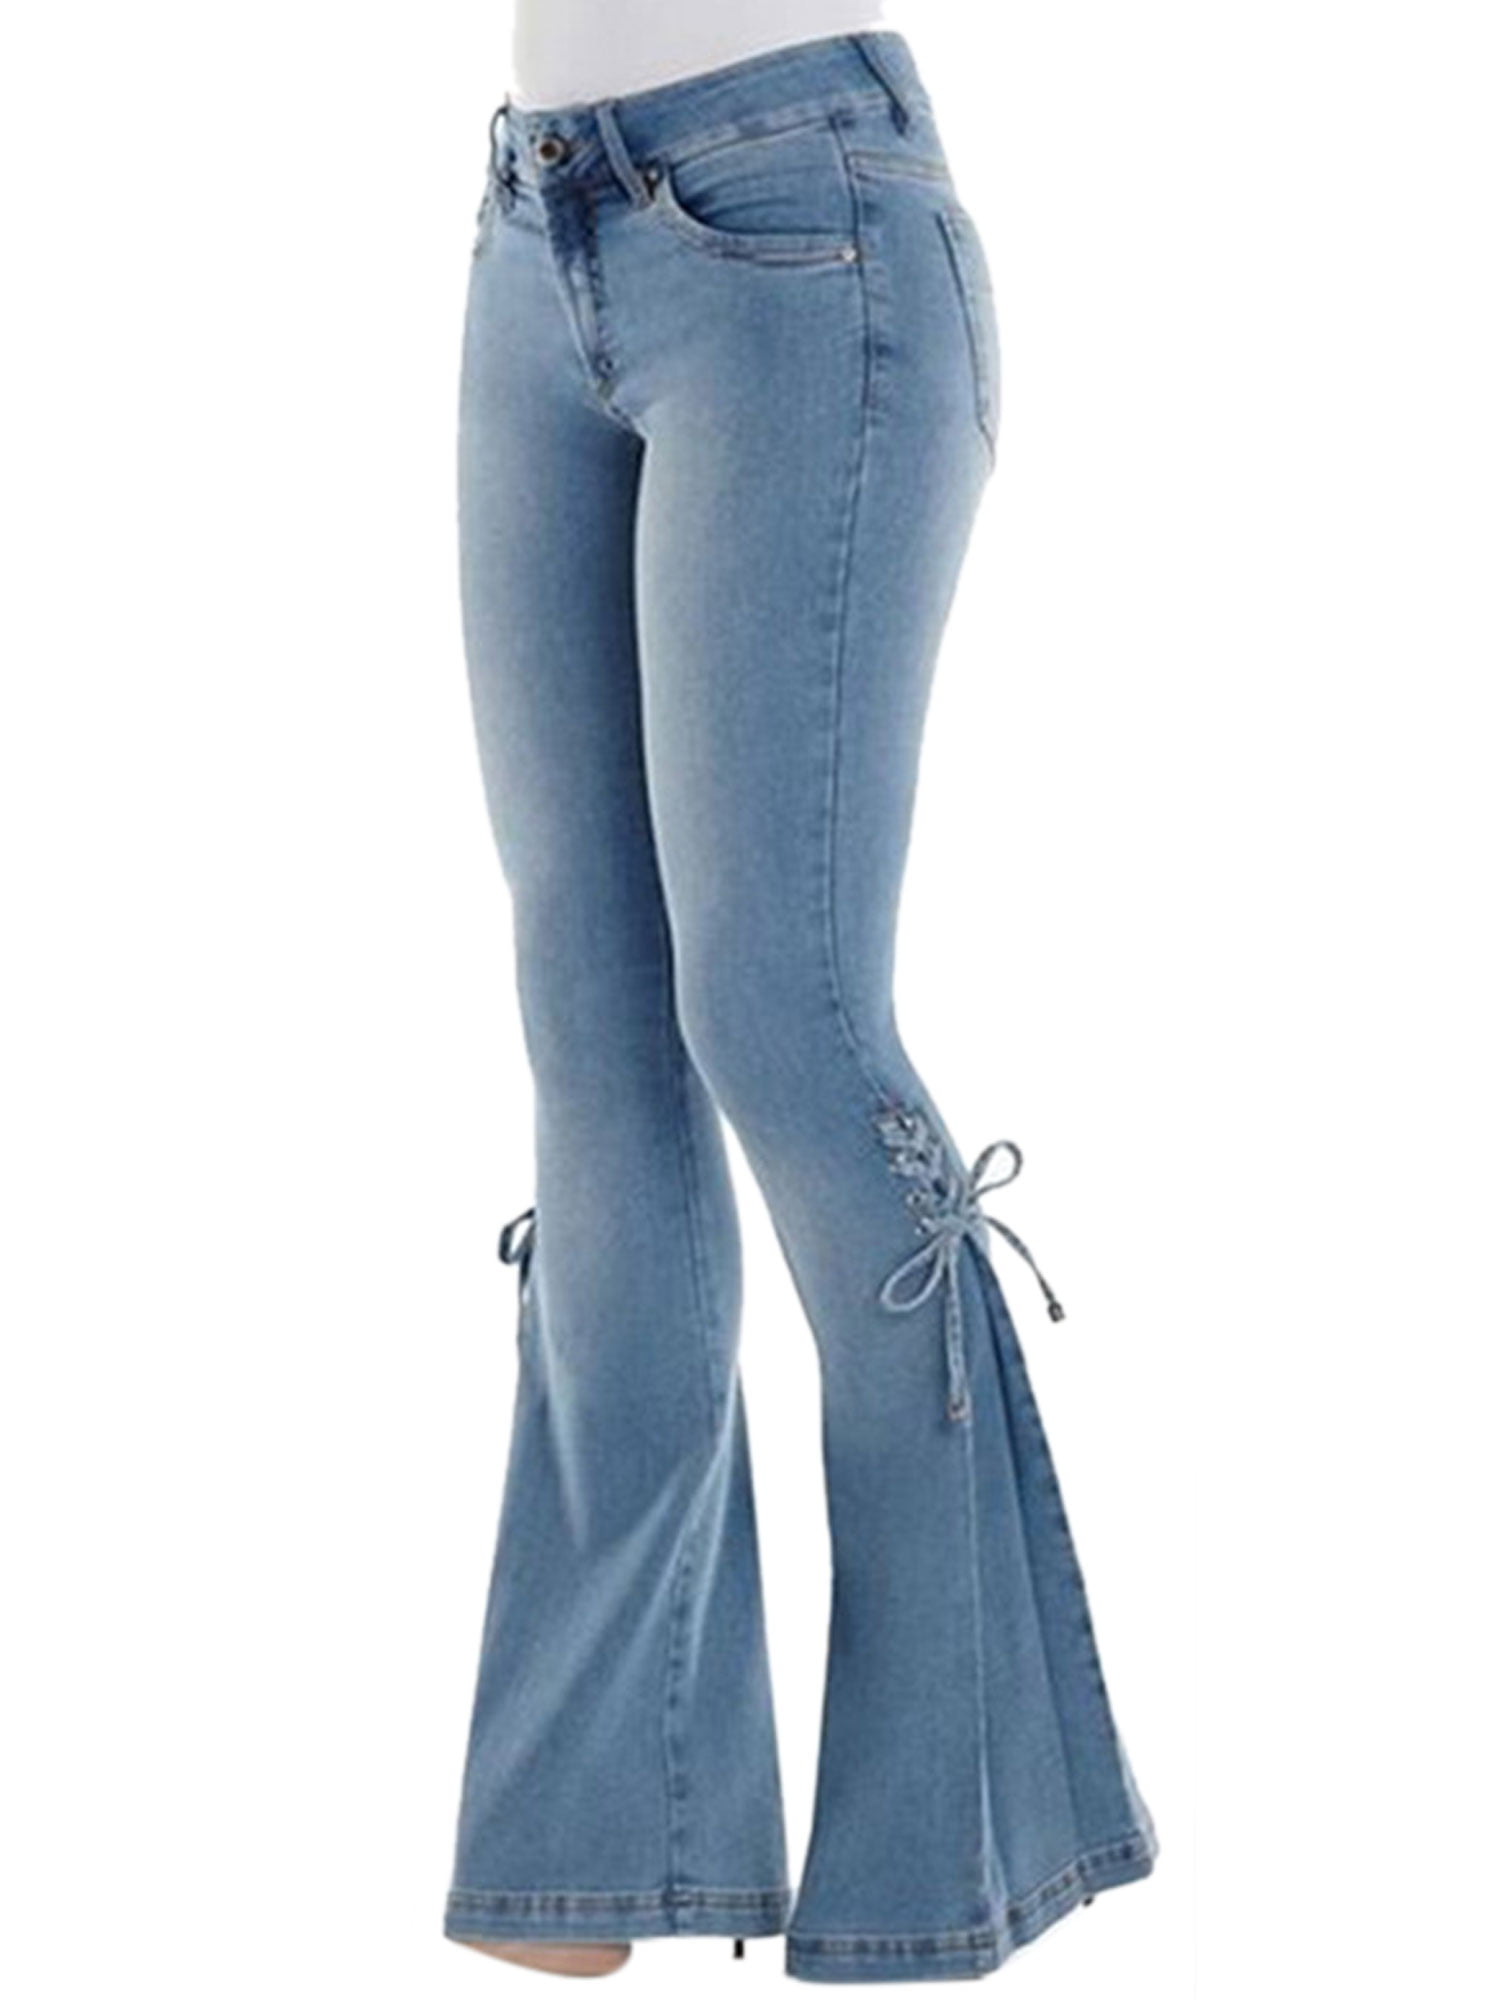 New Fashion Women Ripped Hole Buttons Skinny Long Bell-Bottom Jeans Denim Pants